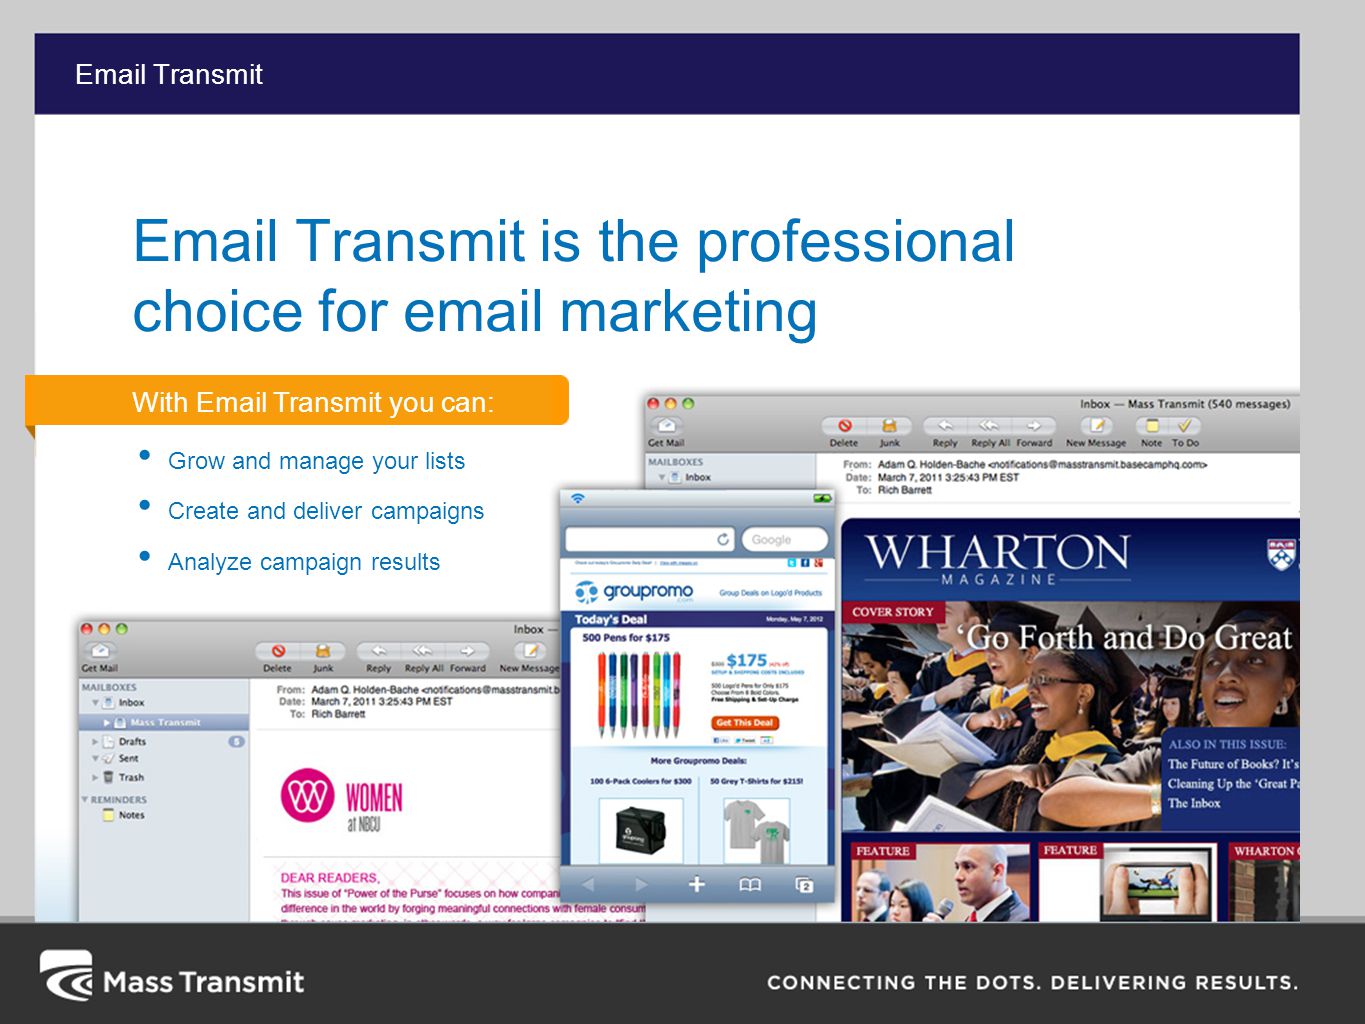 Transmit  Transmit is the professional choice for  marketing With  Transmit you can: Grow and manage your lists Create and deliver campaigns Analyze campaign results